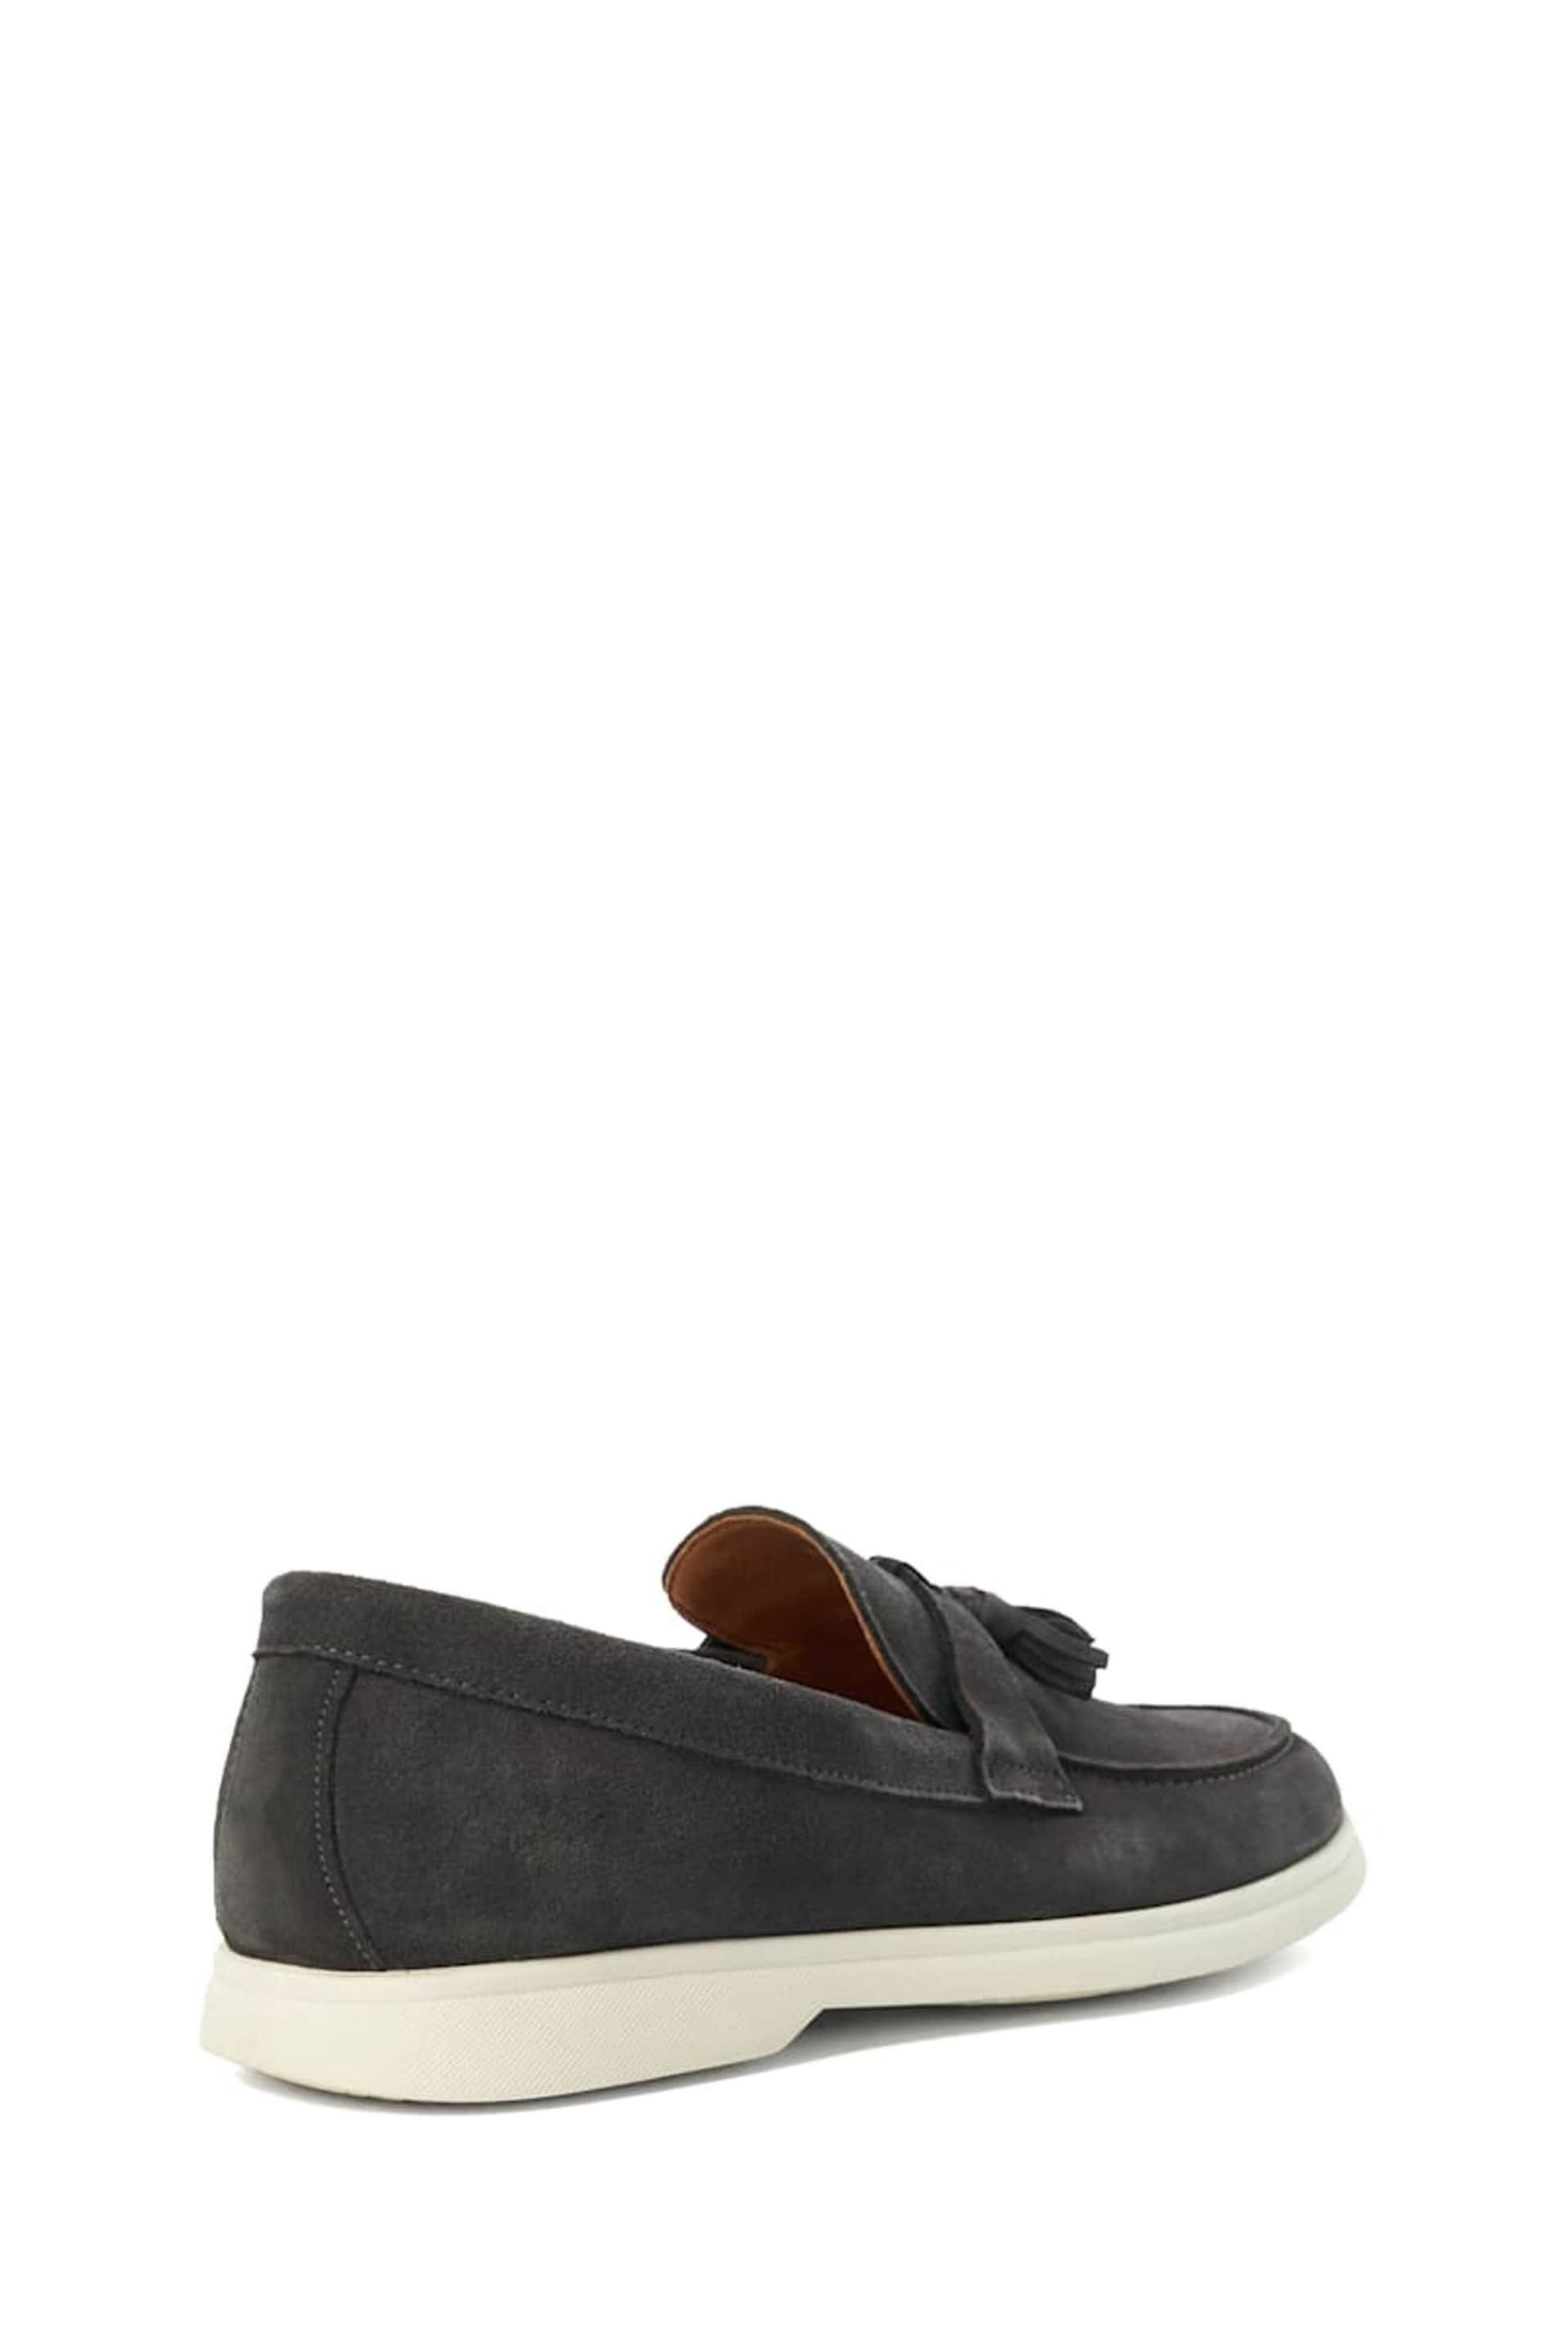 Dune London Grey Believes Top Stitch Tassel Loafers - Image 4 of 6